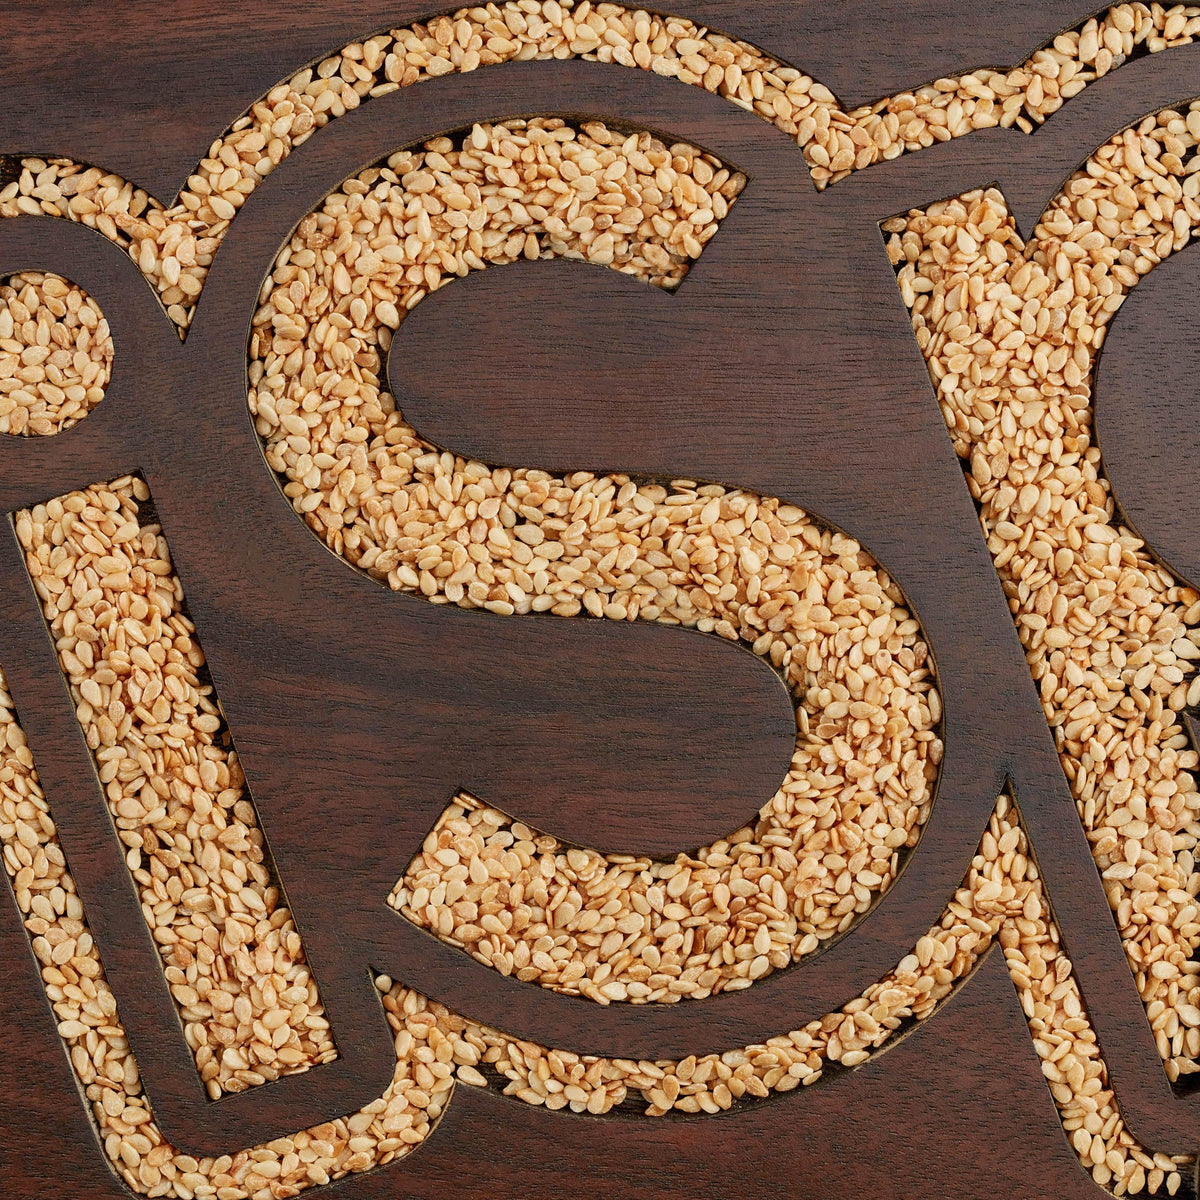 Introducing Roasted Hulled Sesame Seeds: Delicious and Delicious! 